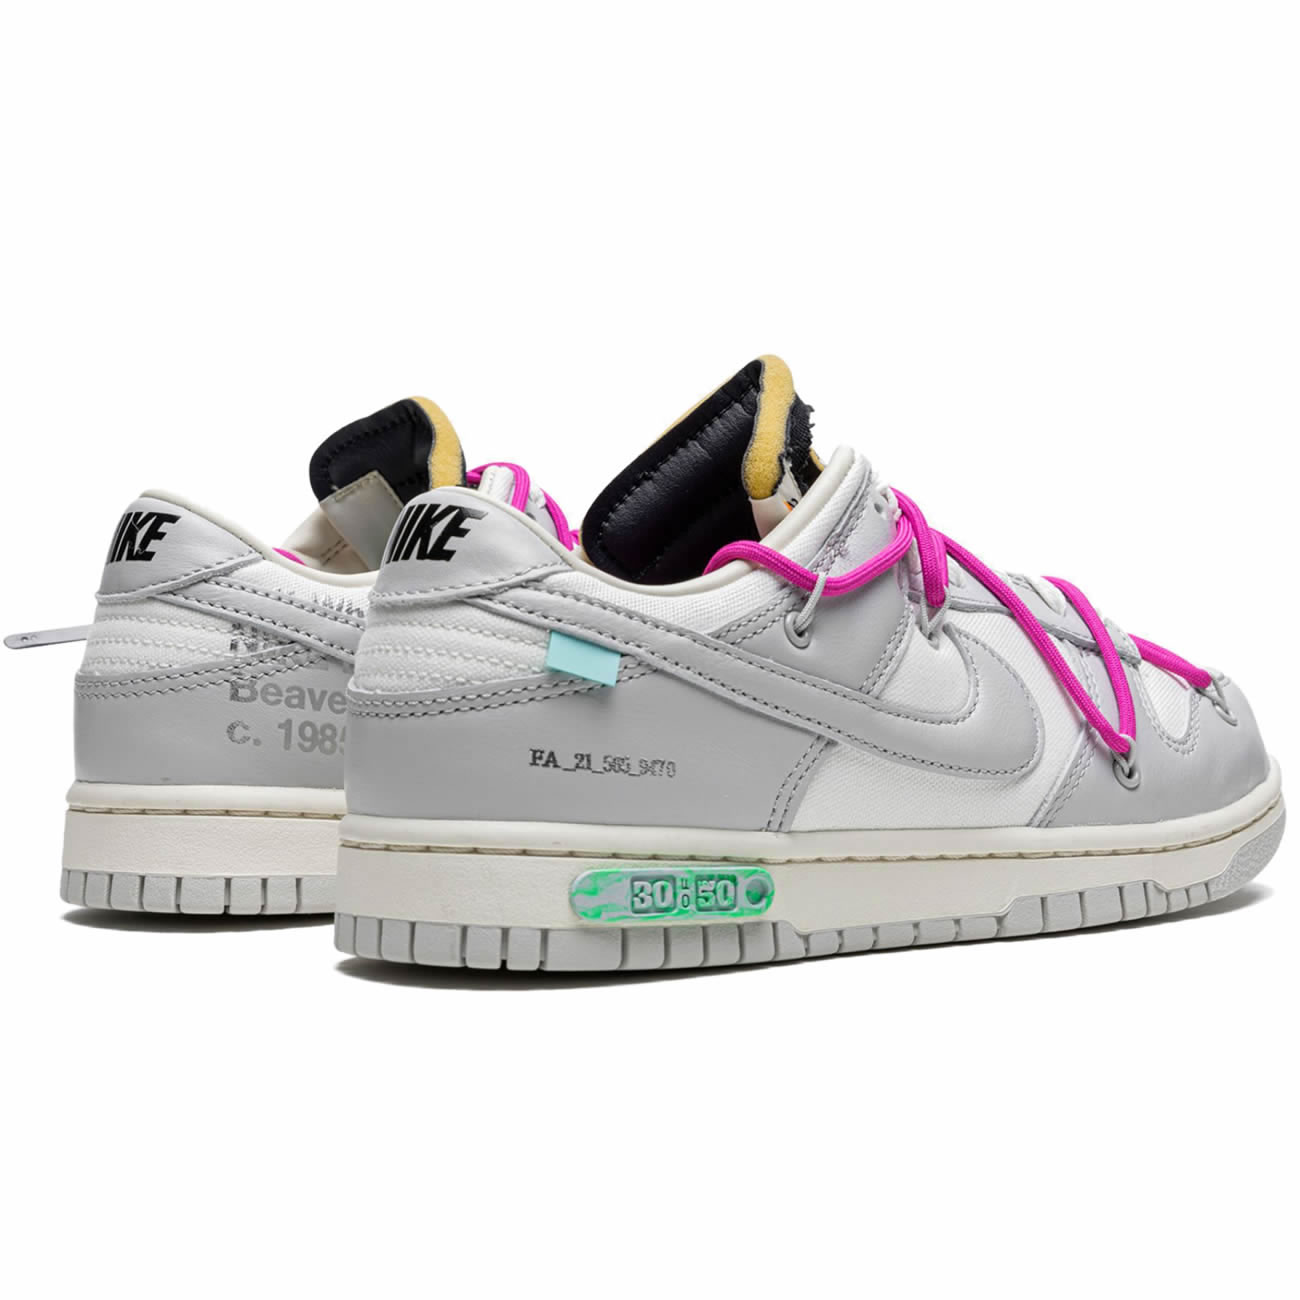 Off-White x Nike SB Dunk Low Lot 30 Of 50 Sail/Neutral Grey-Pink DM1602-122